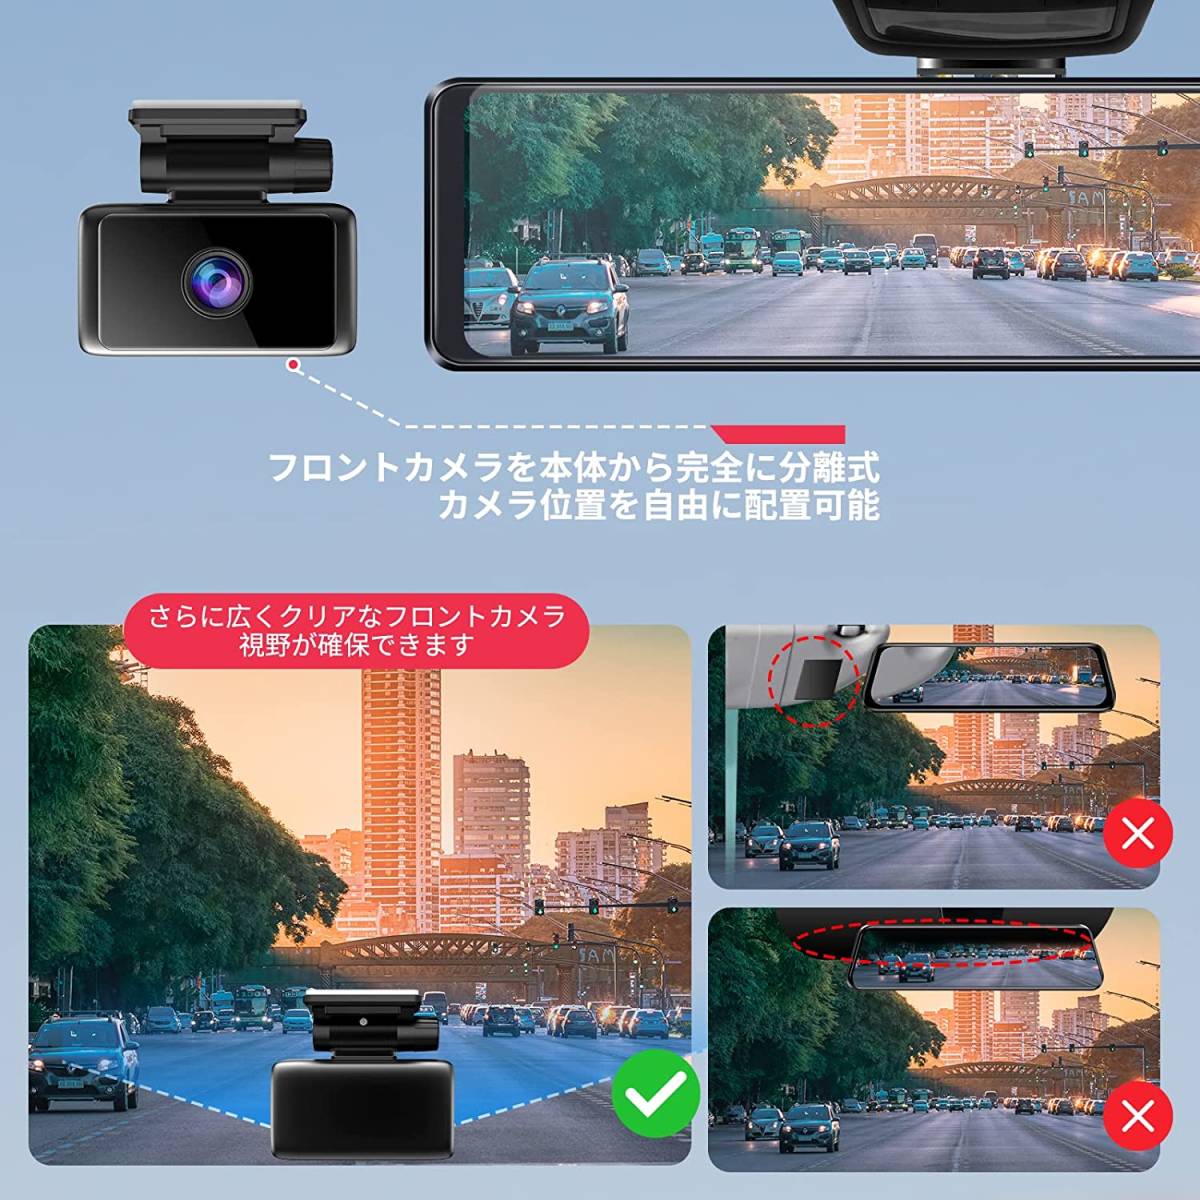  drive recorder mirror type separation 2K+2K.[11.26 -inch large screen + rom and rear (before and after) camera complete separation type ] 64GB high speed SD card attaching left right image reversal possibility 